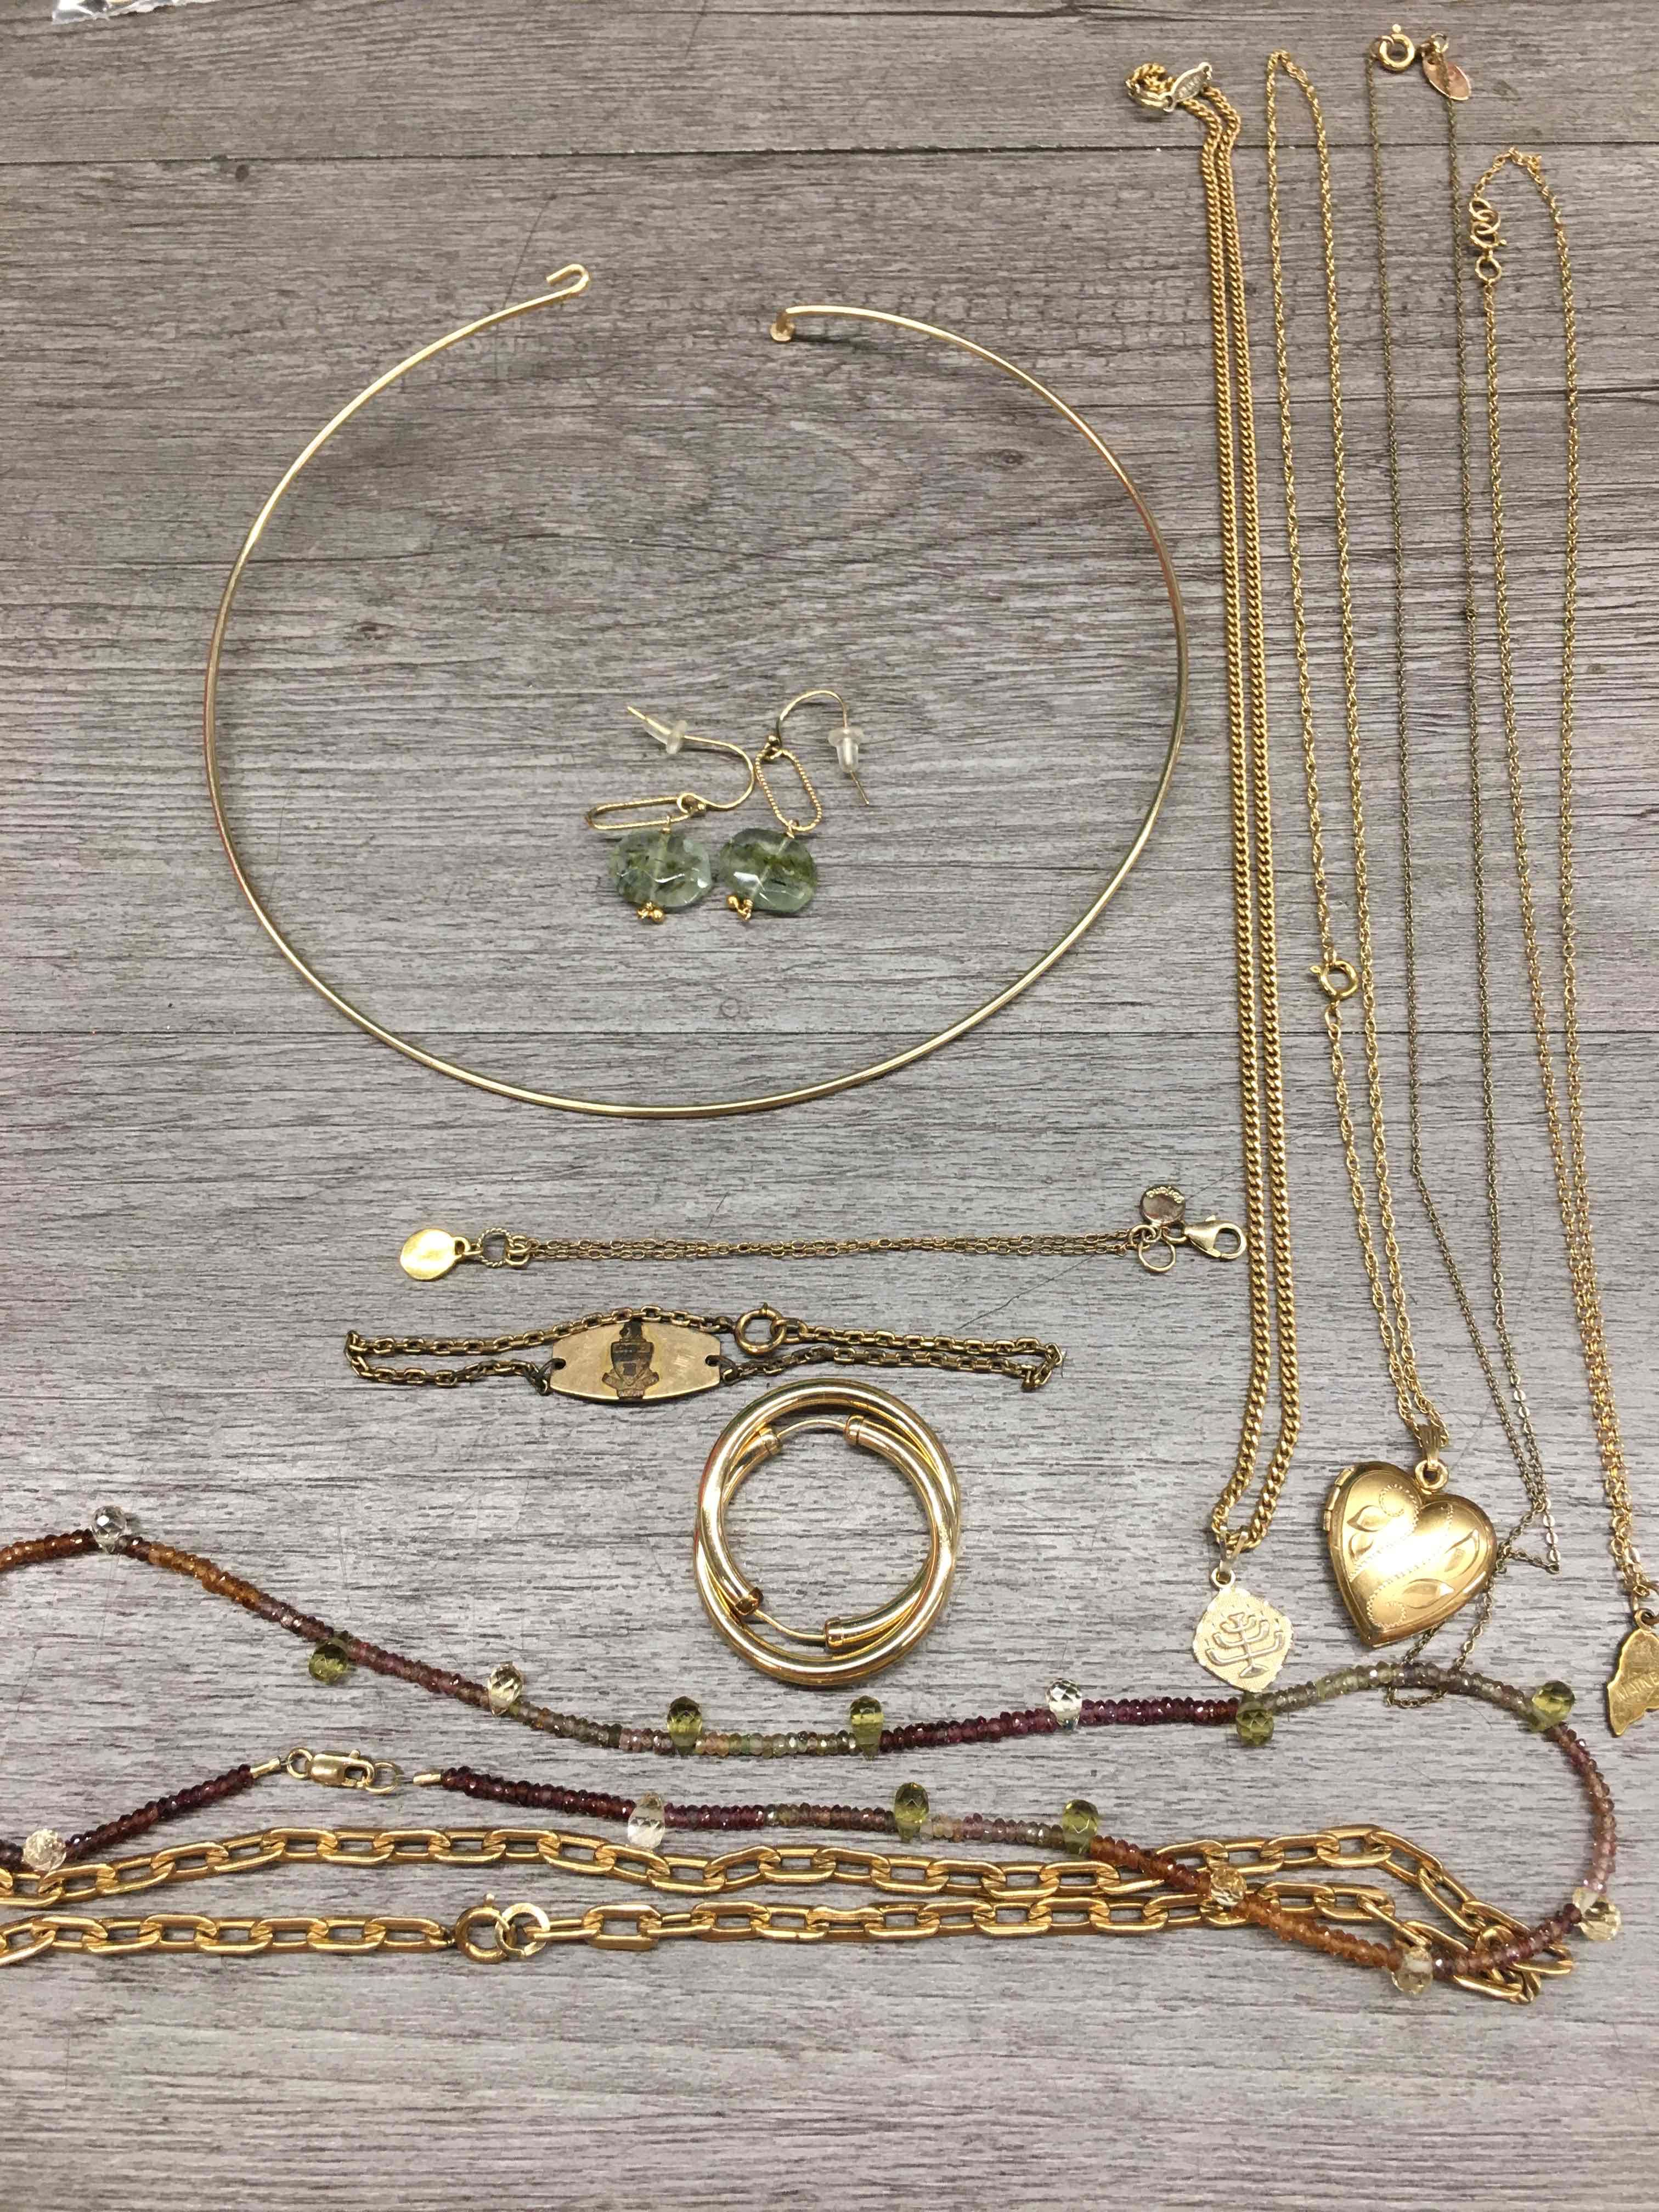 Lot of Gold Filled Jewelry | eBay